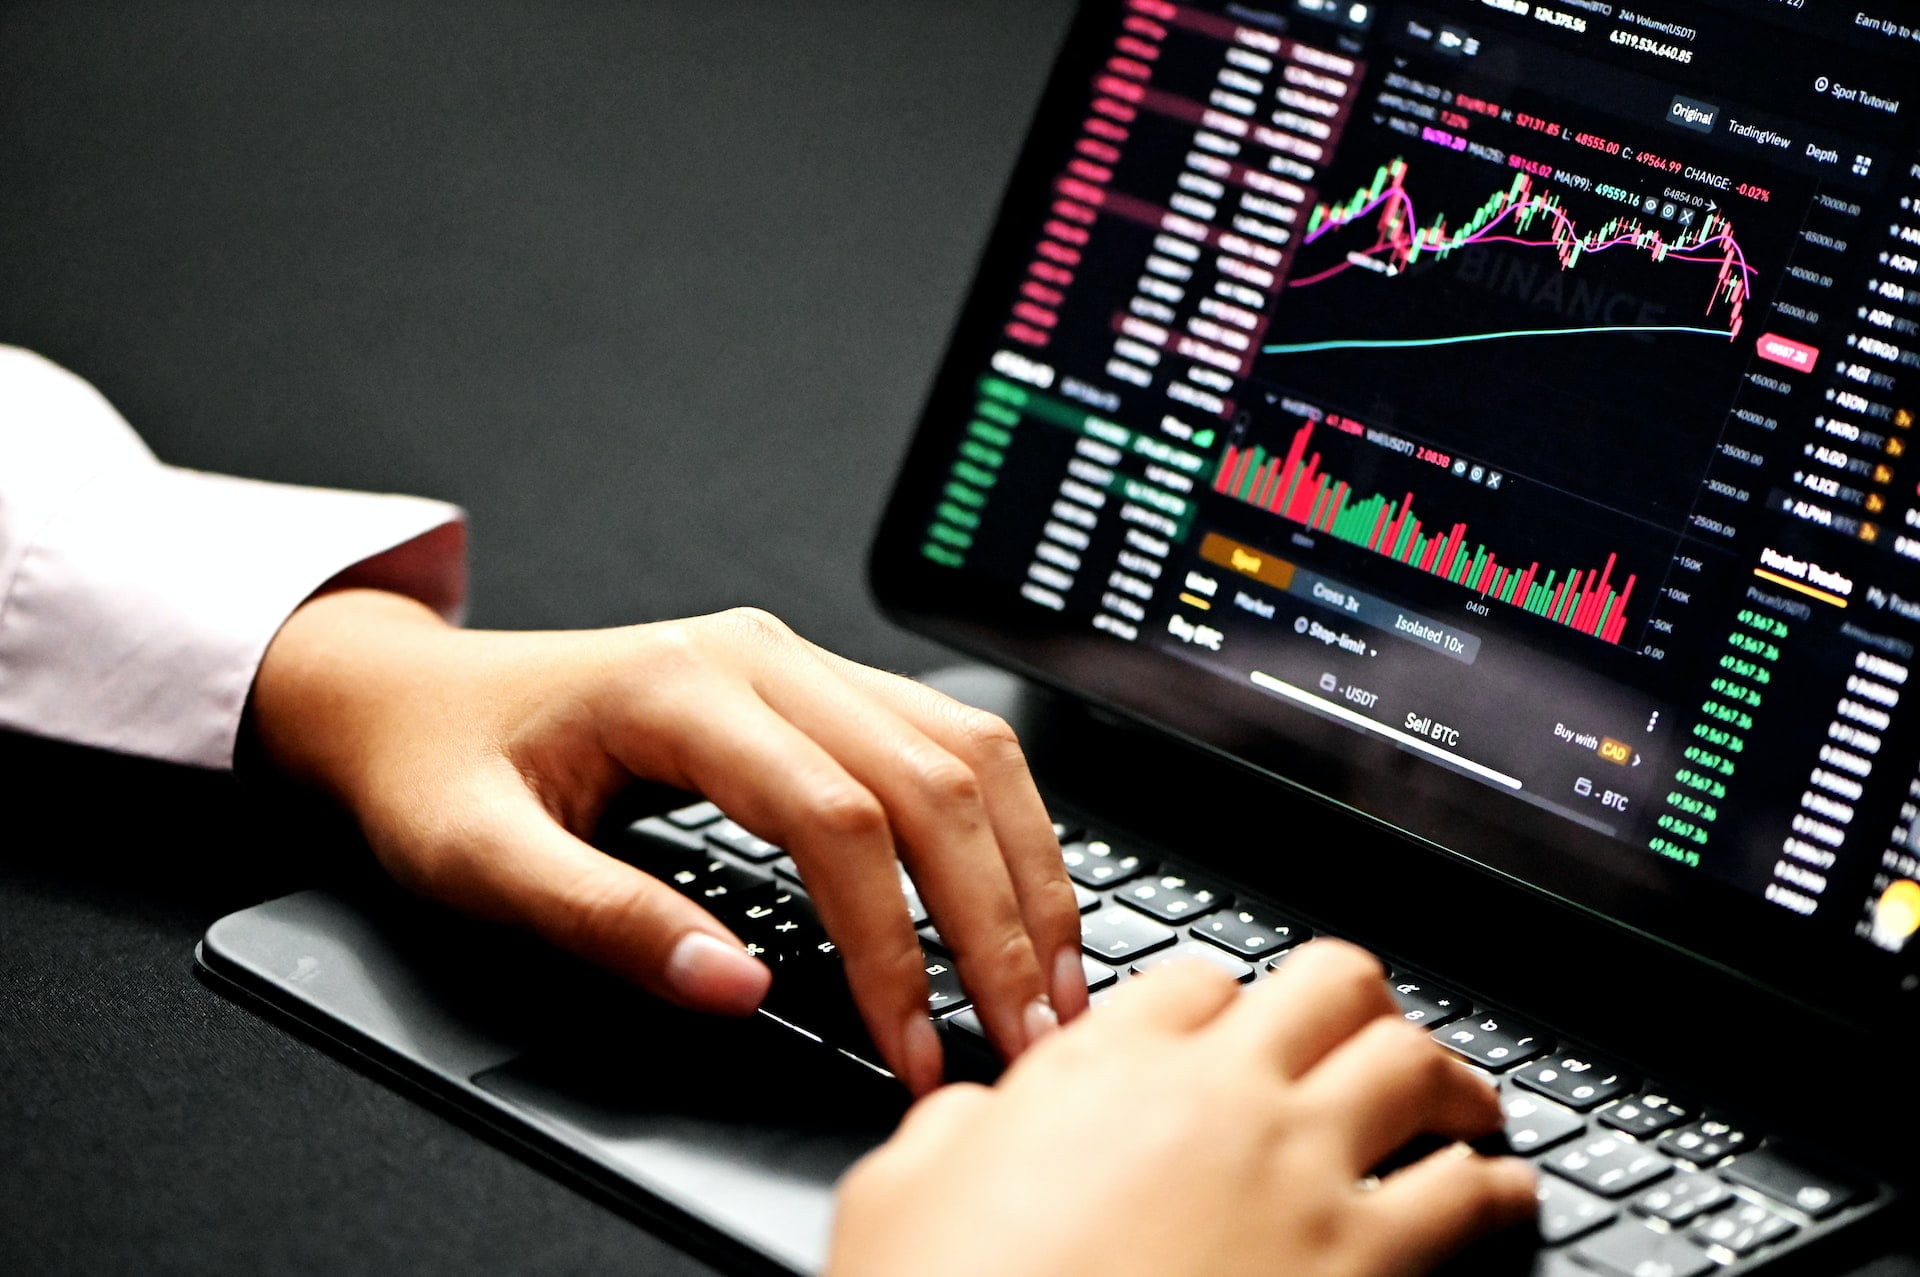 Benefits Of Using A Quality Trading Platform For Your Needs